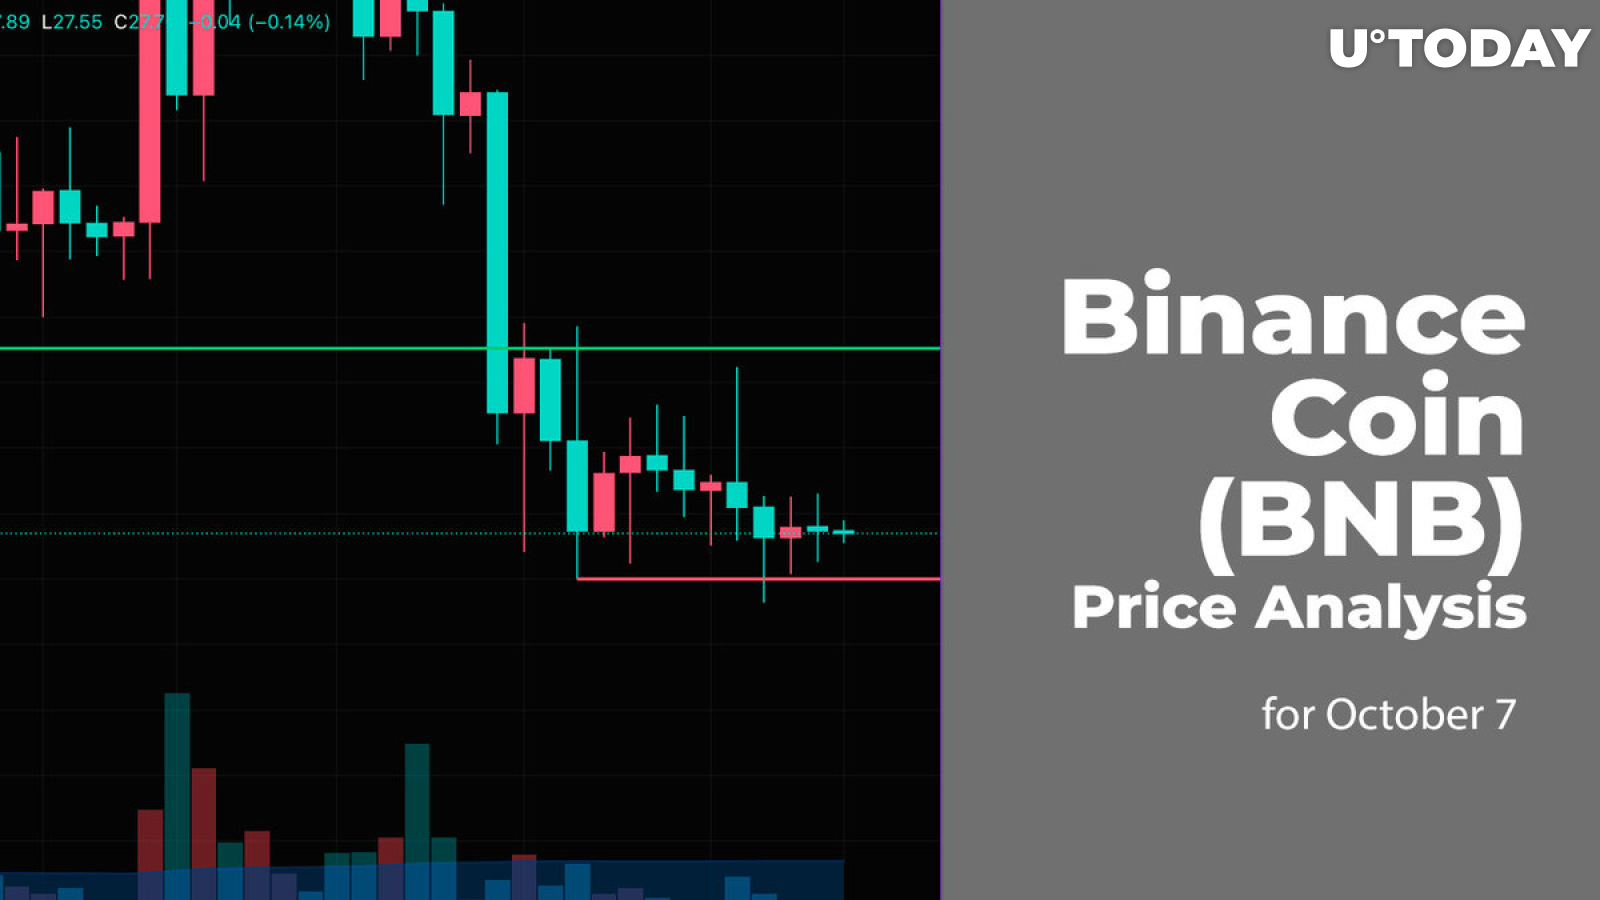 Binance Coin (BNB) Price Analysis for October 7